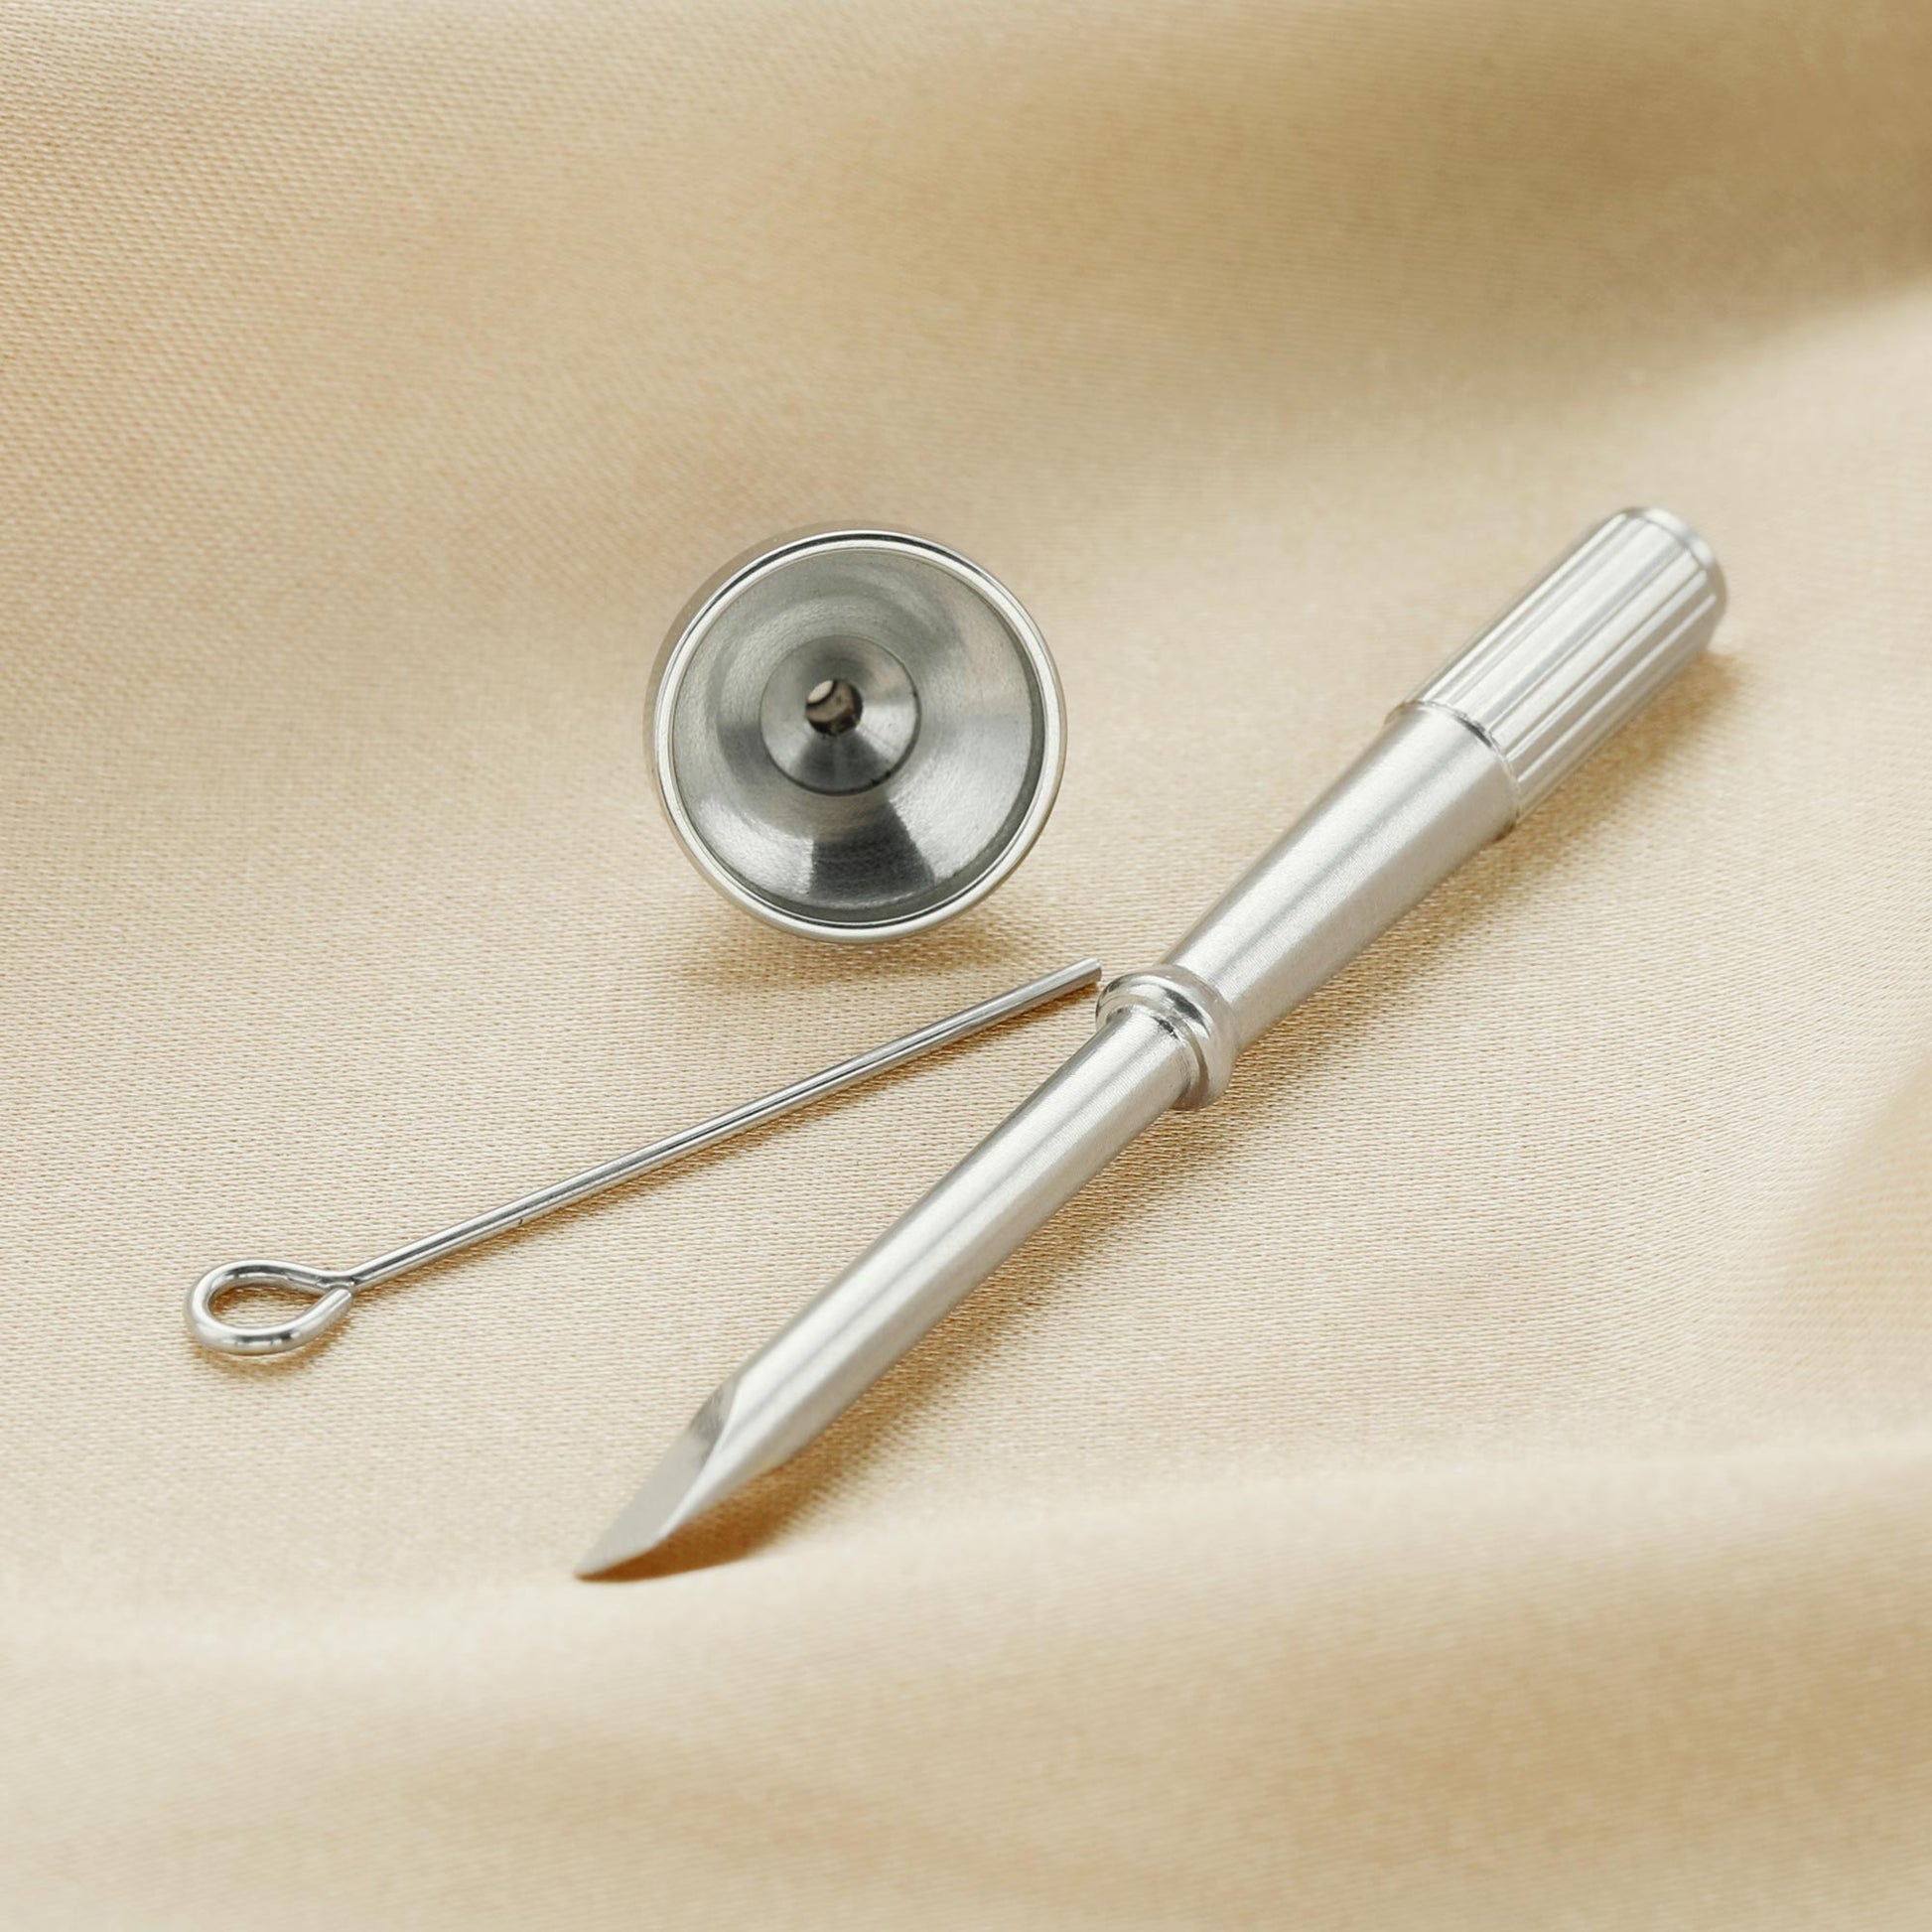 A small silver screwdriver, funnel and scoop.